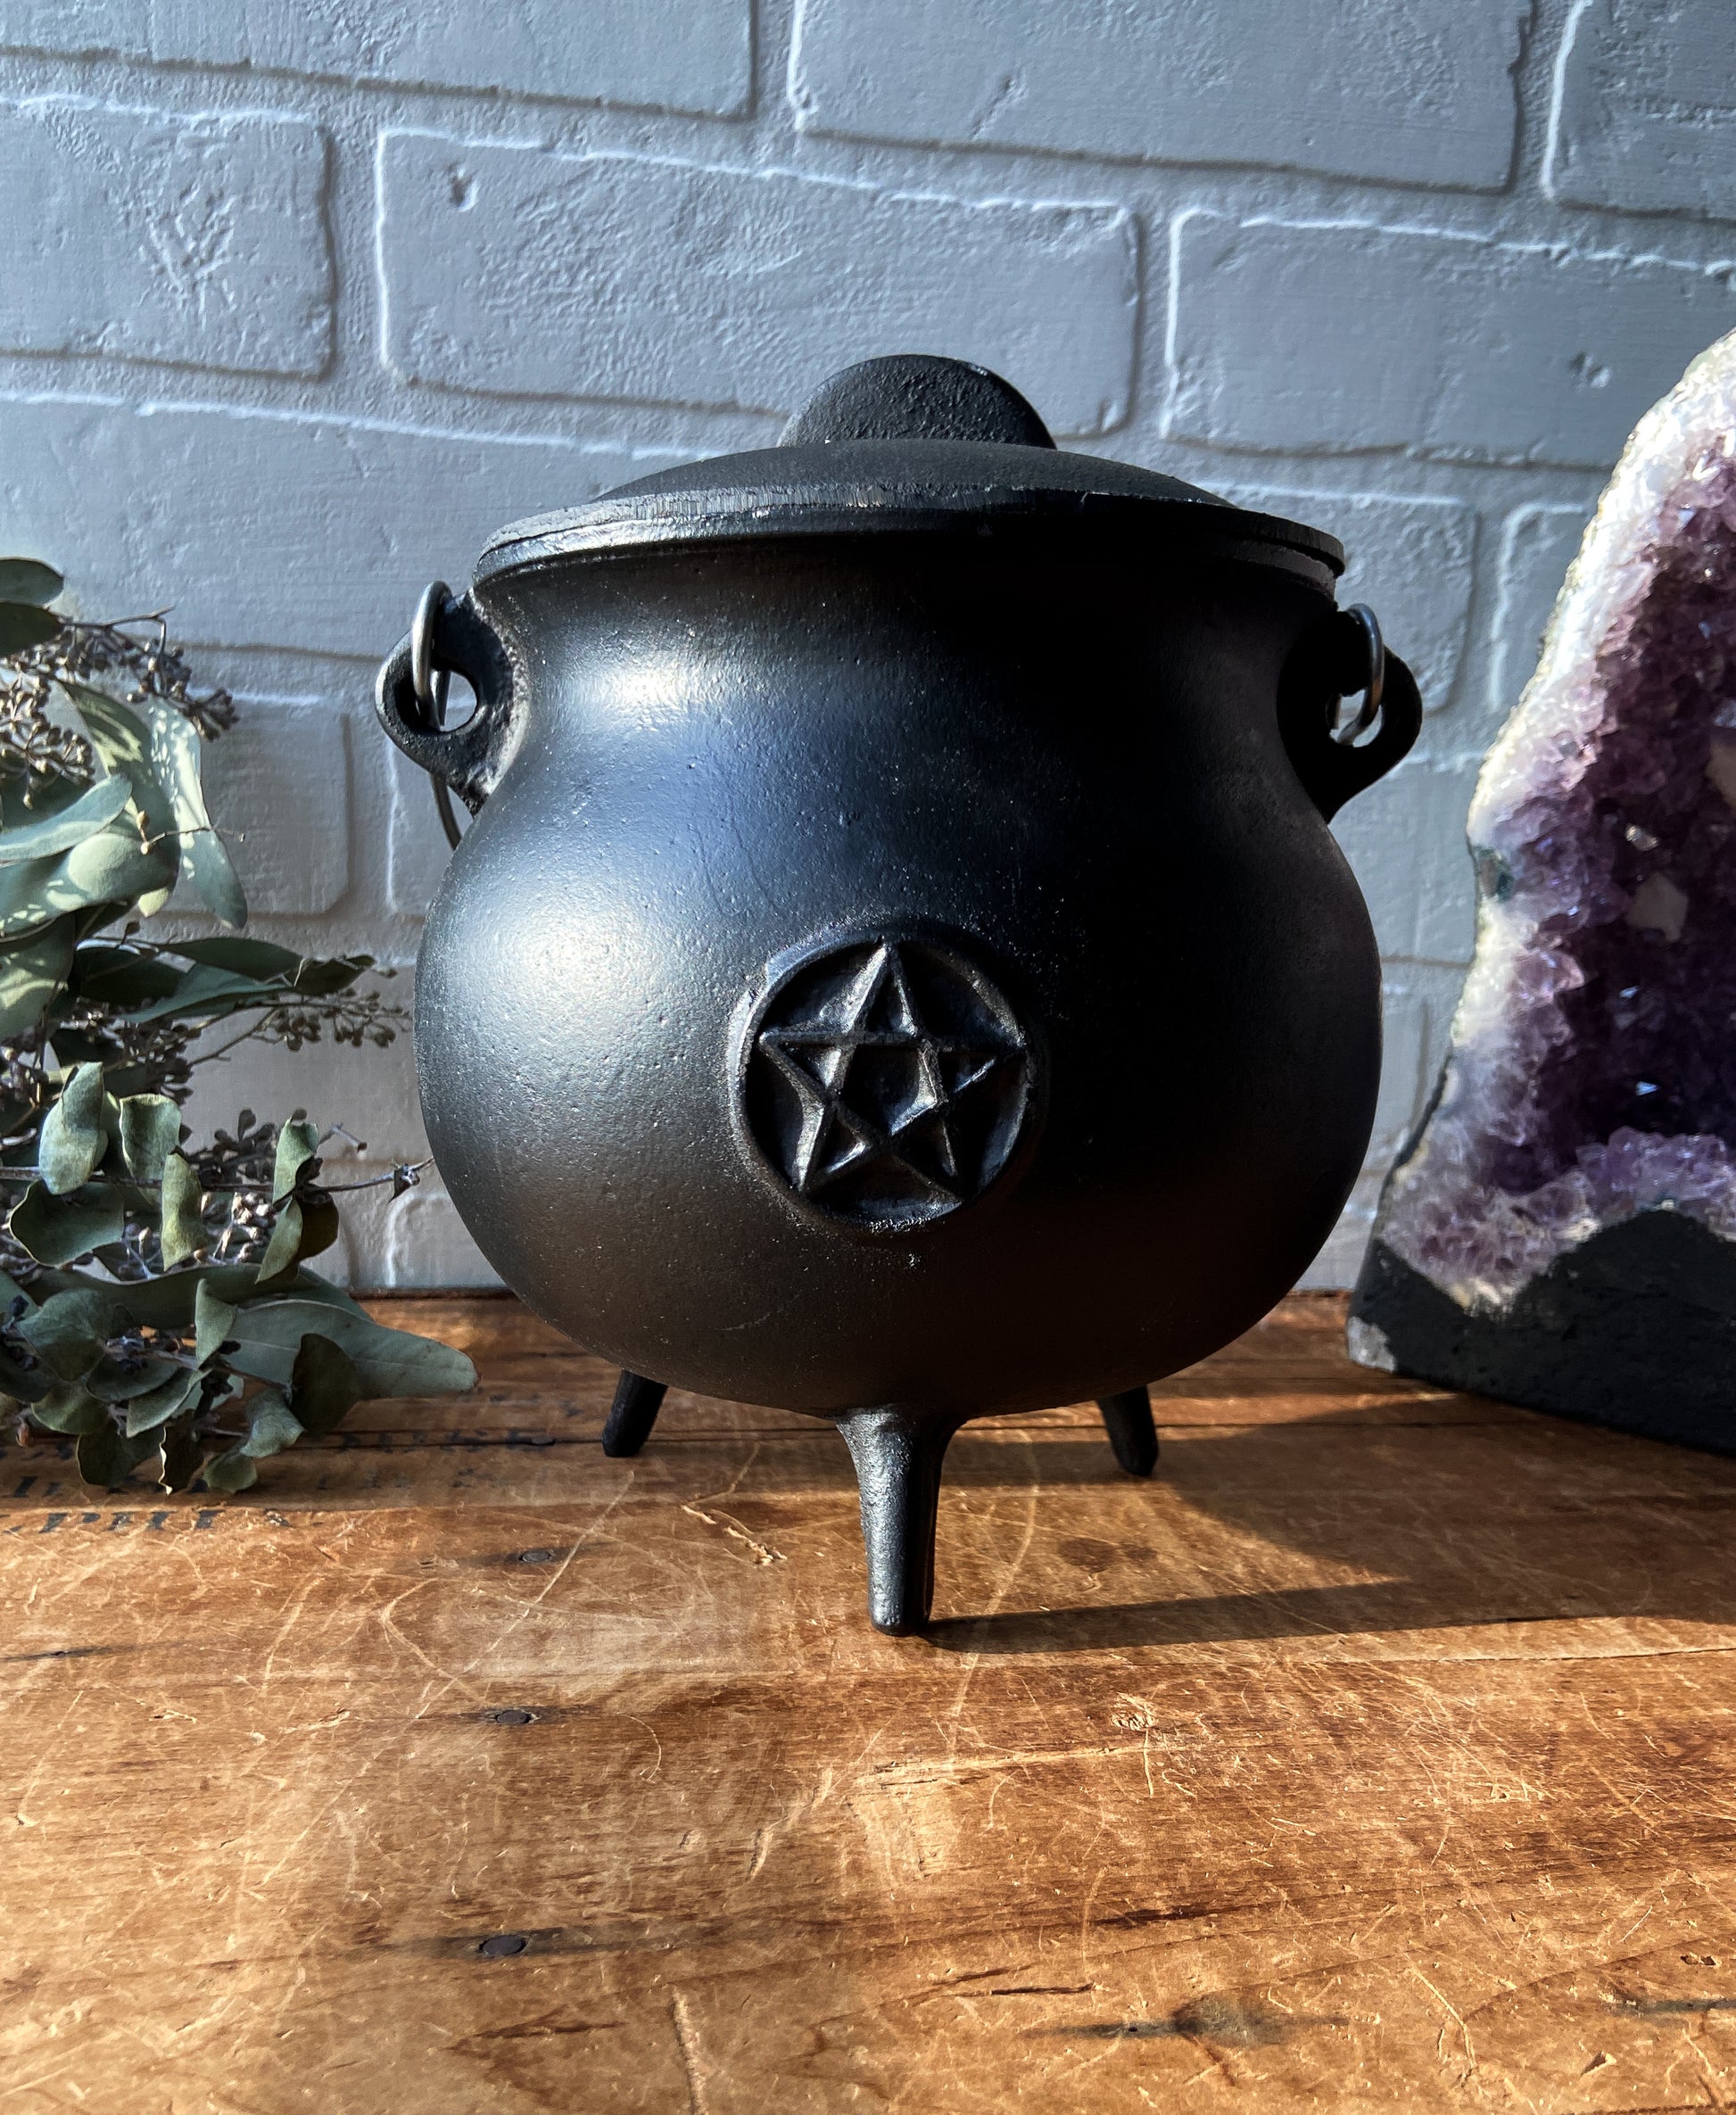 High-quality image showcasing a black cast iron cauldron, ideal for brewing potions, burning herbs, and embracing your inner witchy vibes